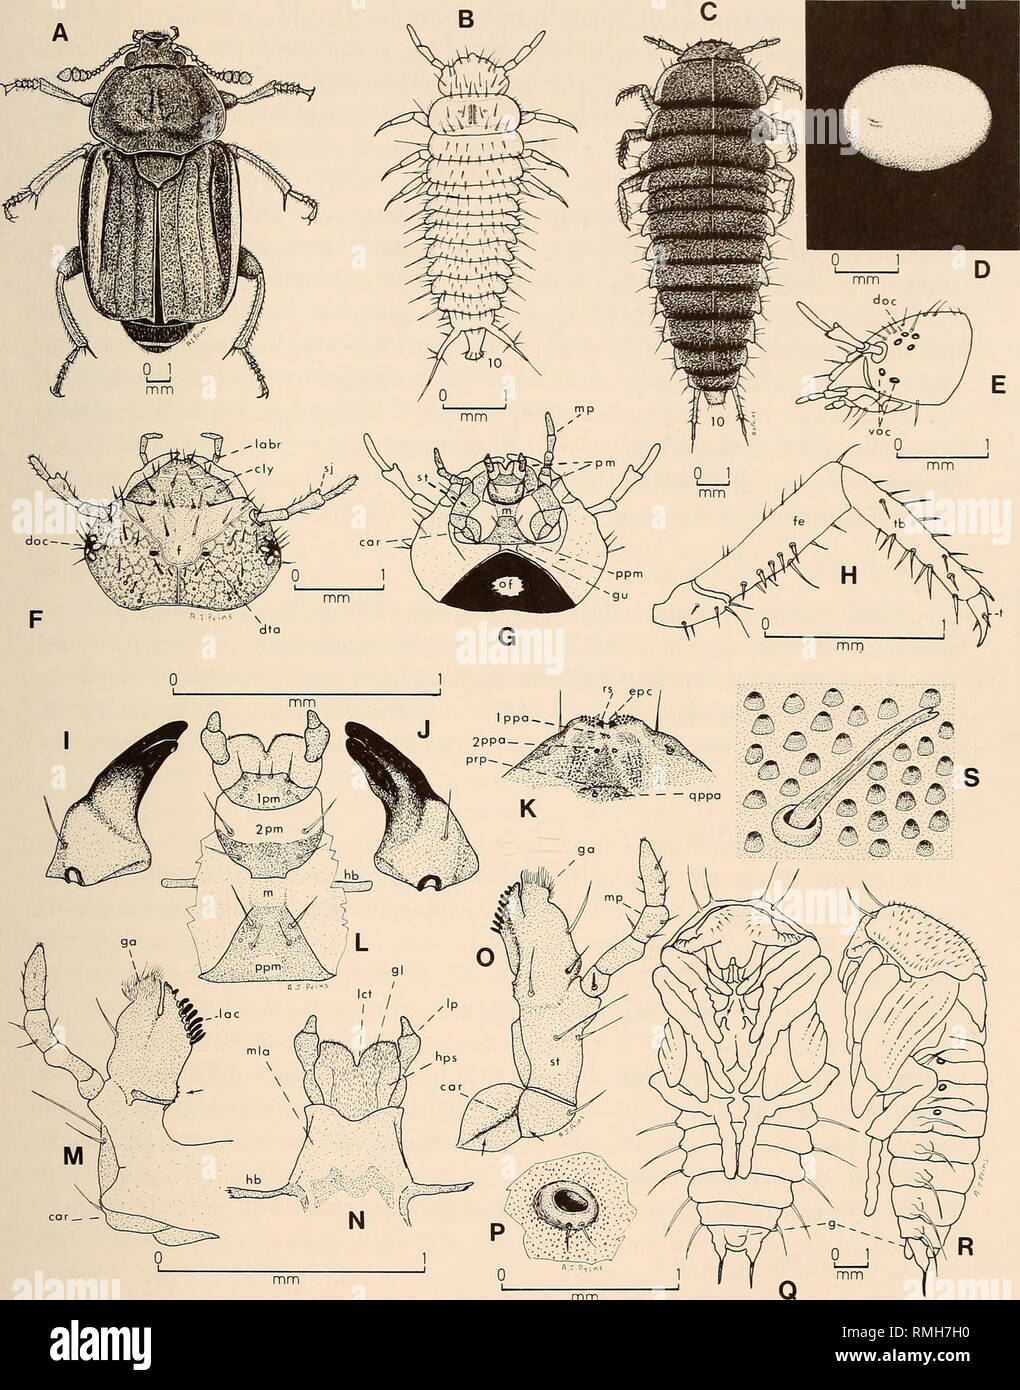 . Annals of the South African Museum = Annale van die Suid-Afrikaanse Museum. Natural history. SOUTH AFRICAN ARTHROPODS 347. Fig. 15. Family Silphidae. Silpha micans. A. Adult. B. Newly hatched larva (dorsal view). C. Adult larva (dorsal view). D. Egg. E. Head (left lateral view). F. Head (dorsal view). G. Head (ventral view). H. Right mesothoracic leg. I. Left mandible (dorsal view). J. Right mandible (dorsal view). K. Epipharynx. L. Labium (ventral view). M. Left maxilla (dorsal view). N. Labium (dorsal view). O. Left maxilla (ventral view). P. Left mesothoracic spiracle. Q. Pupa (ven- tral  Stock Photo